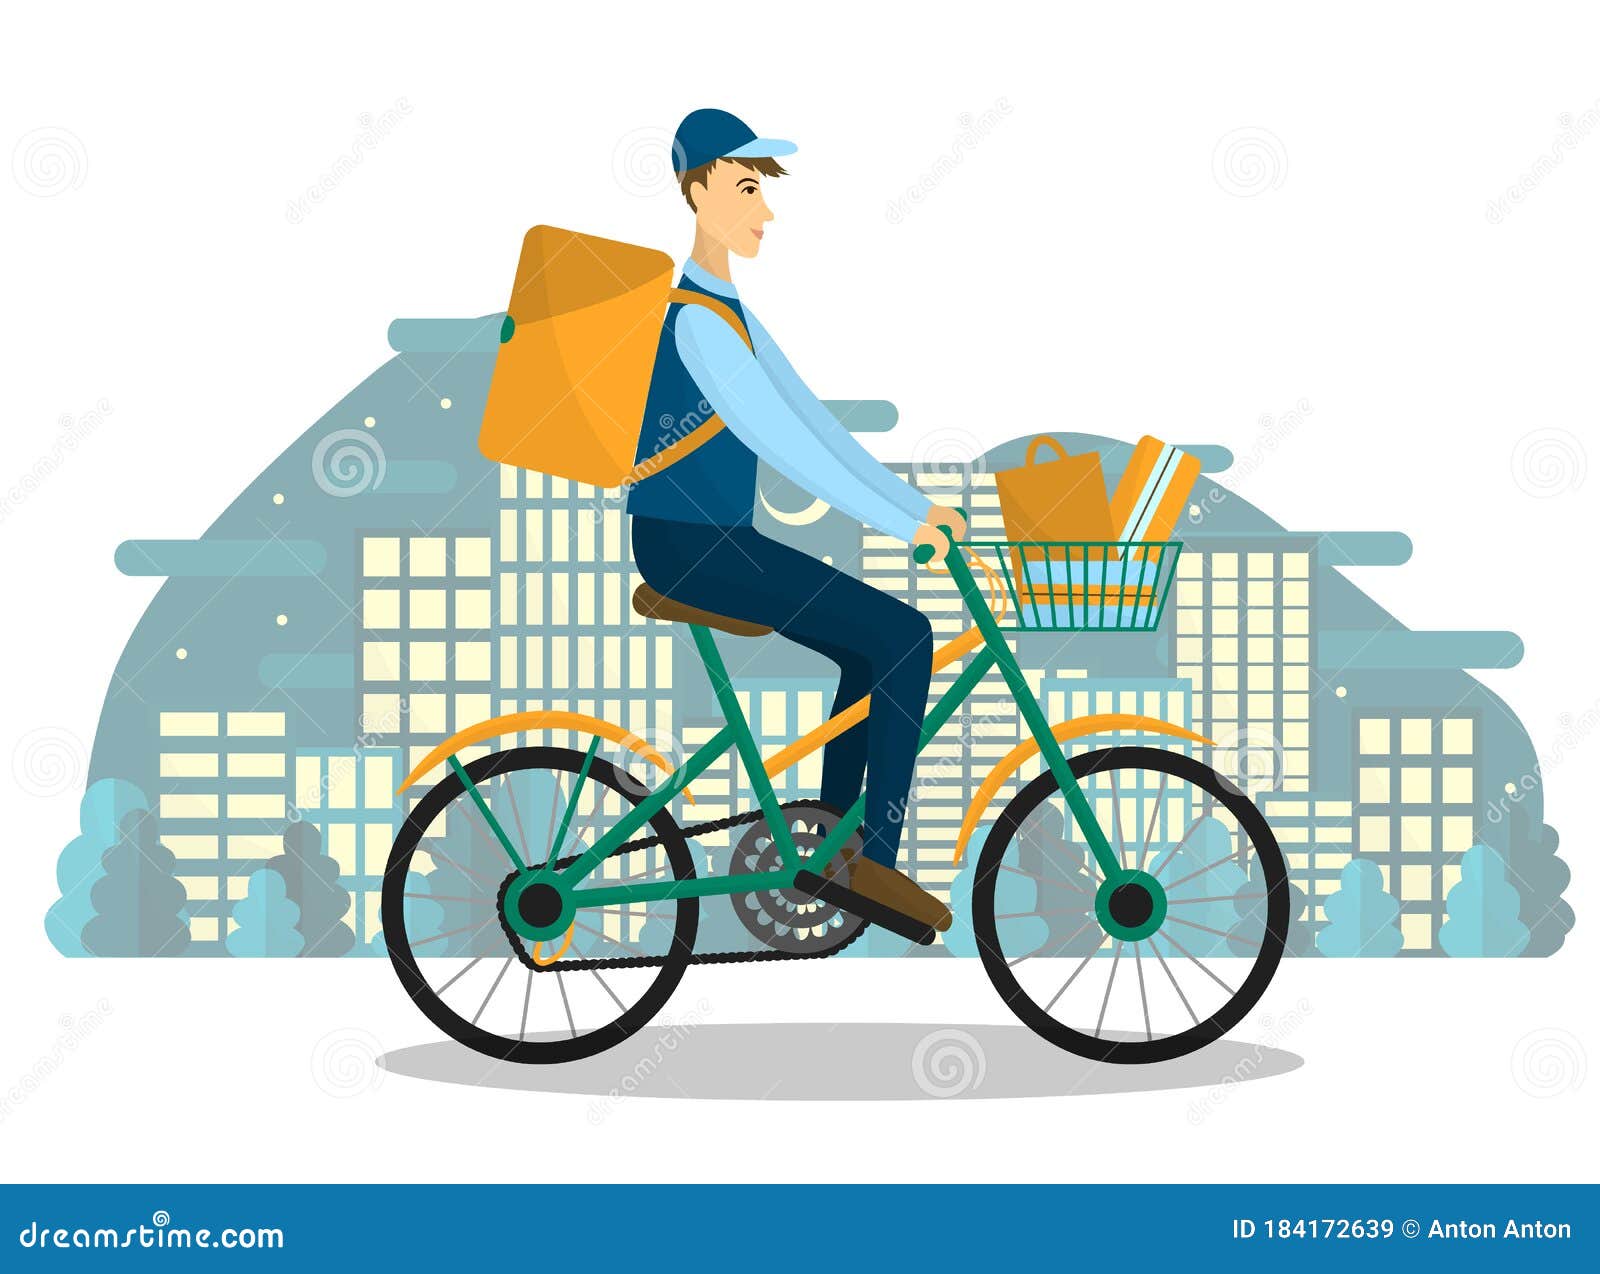 Vector Illustration of the Driver on the Bike with an Order. Courier Ride a Bicycle